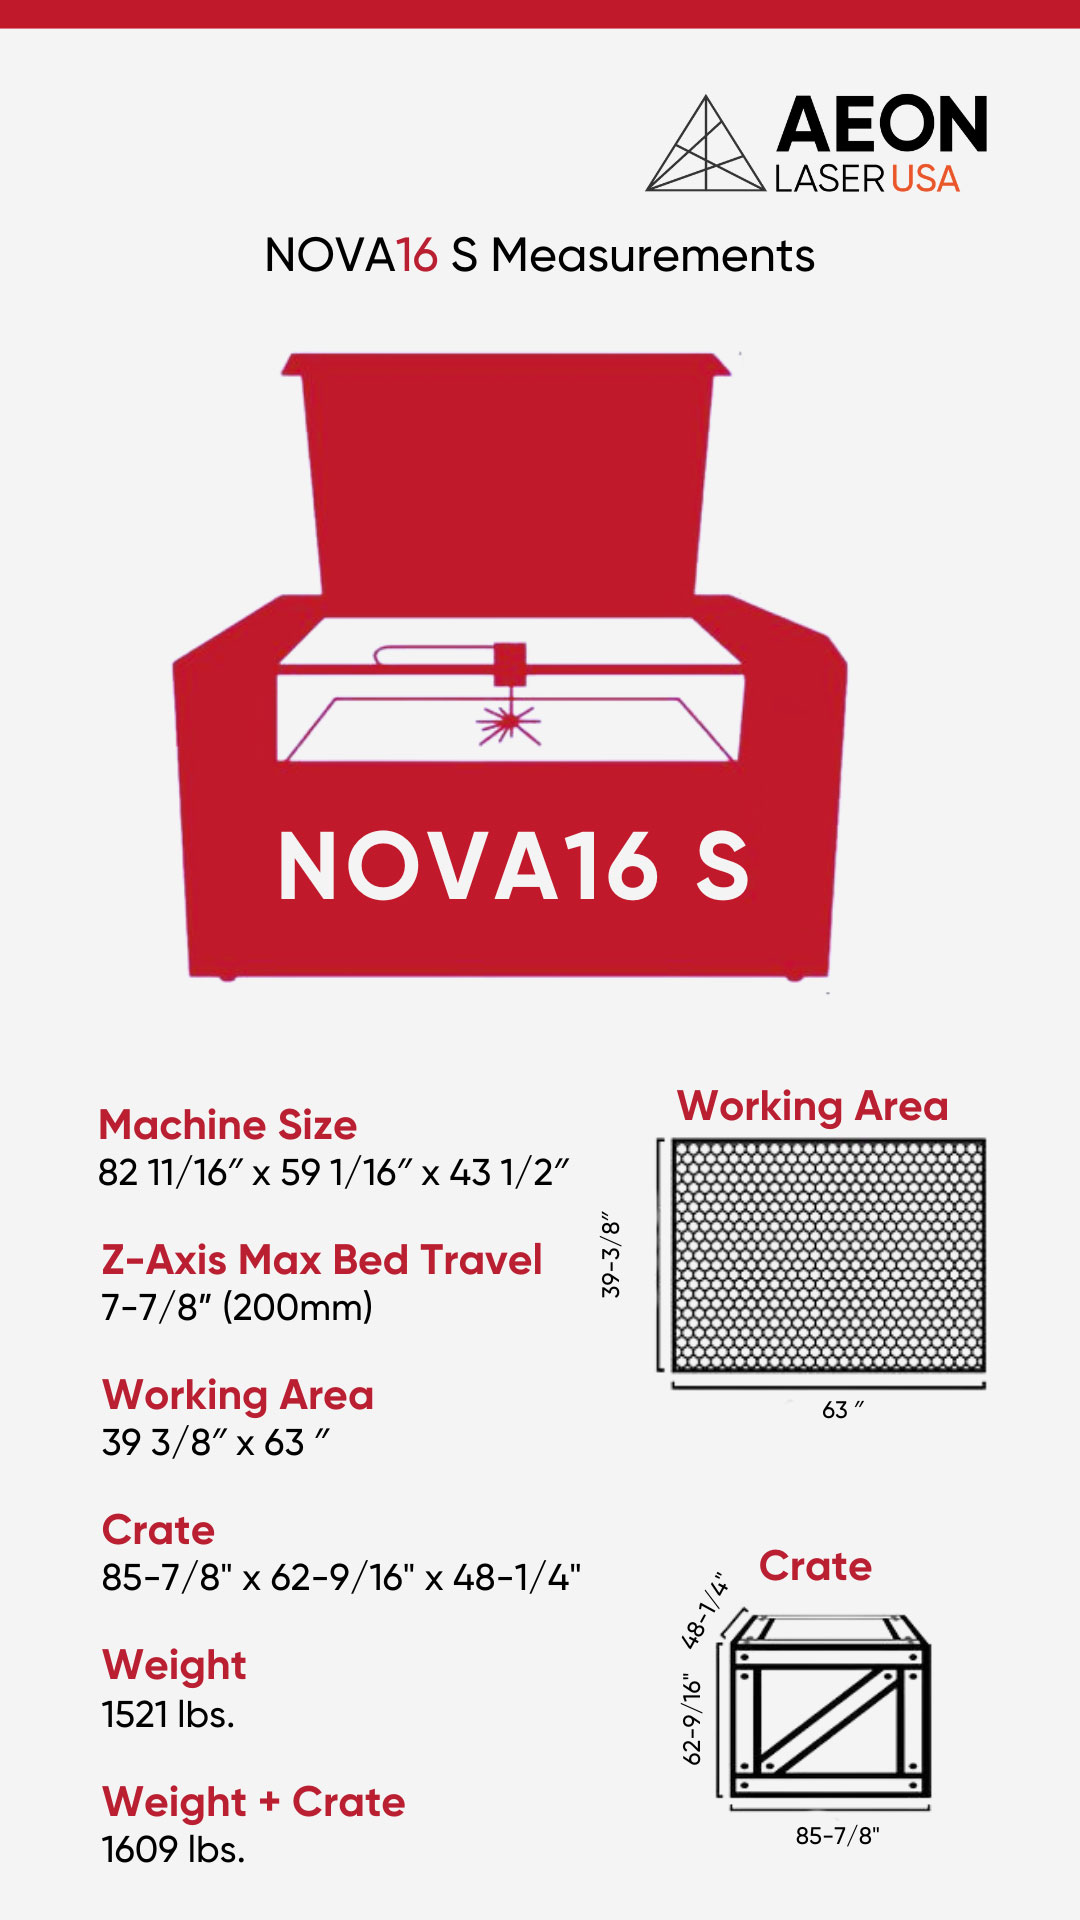 Graphic showing the dimensions of the NOVA 16 S laser, crate size, and weight info